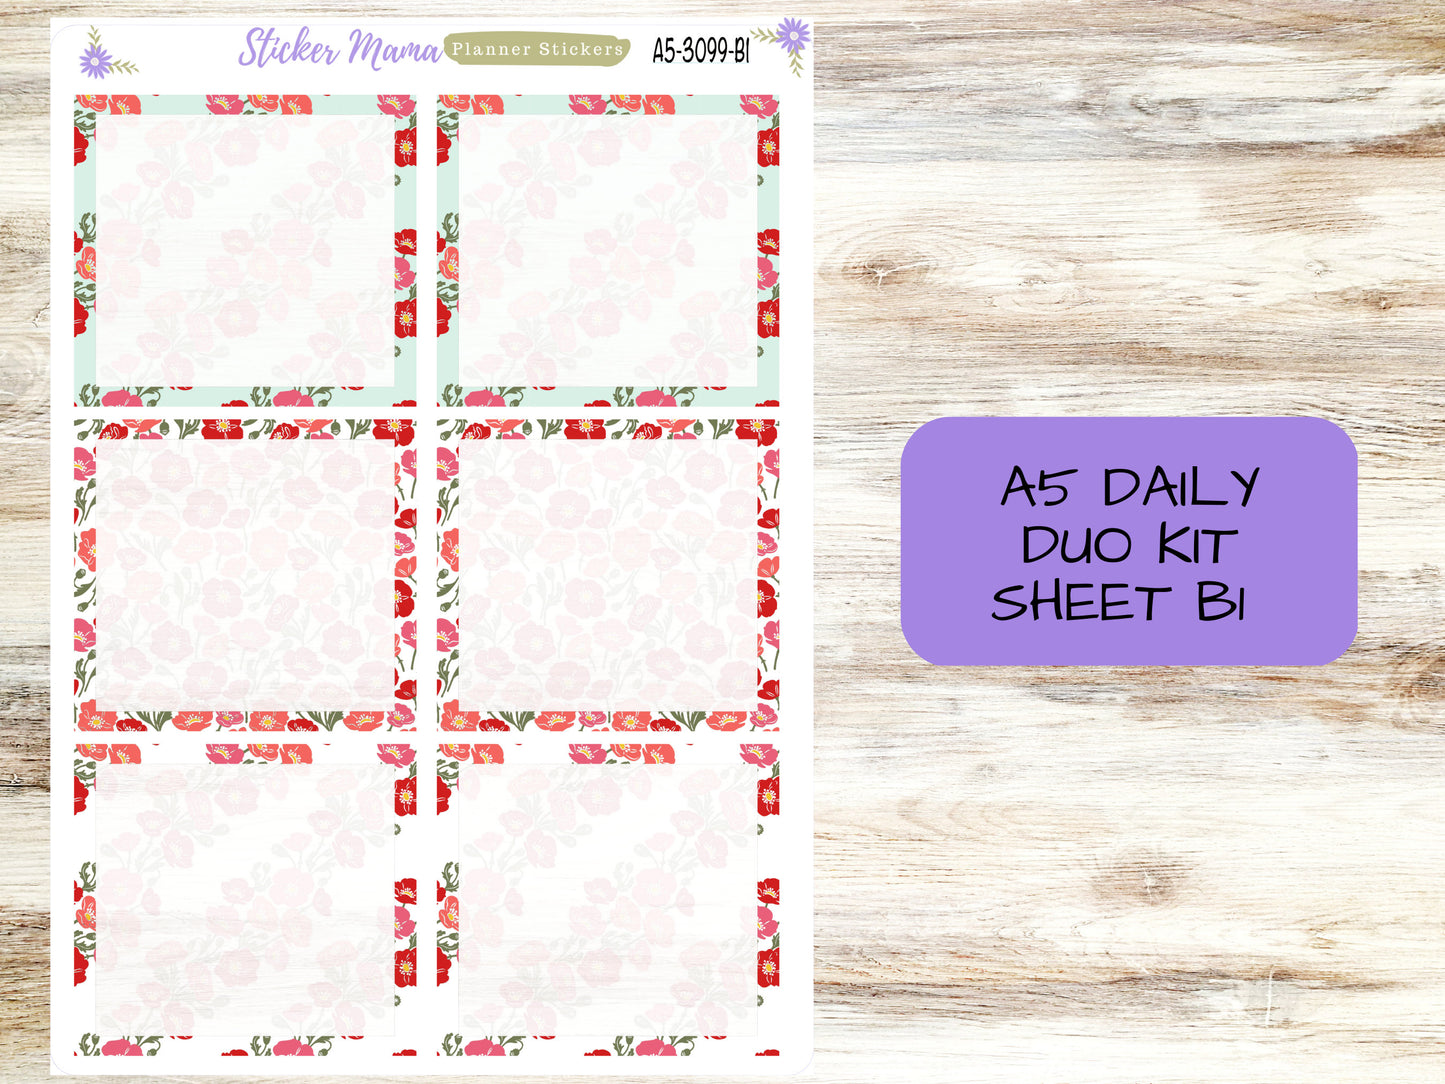 A5-DAILY DUO-Kit #3099 || Beautiful Poppy Blossoms || Planner Stickers - Daily Duo A5 Planner - Daily Duo Stickers - Daily Planner